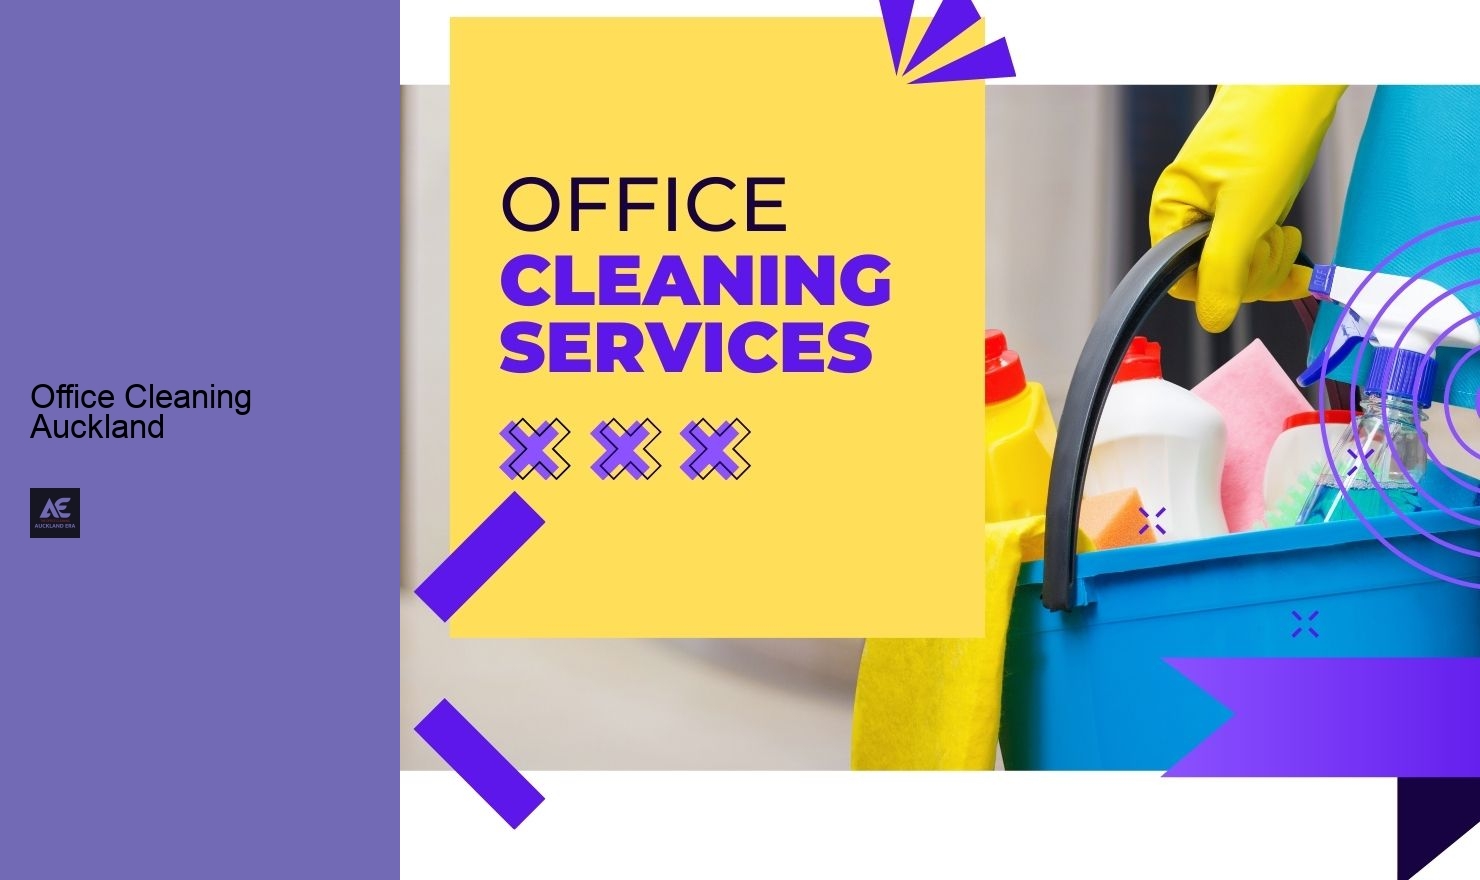 Office Cleaning Auckland